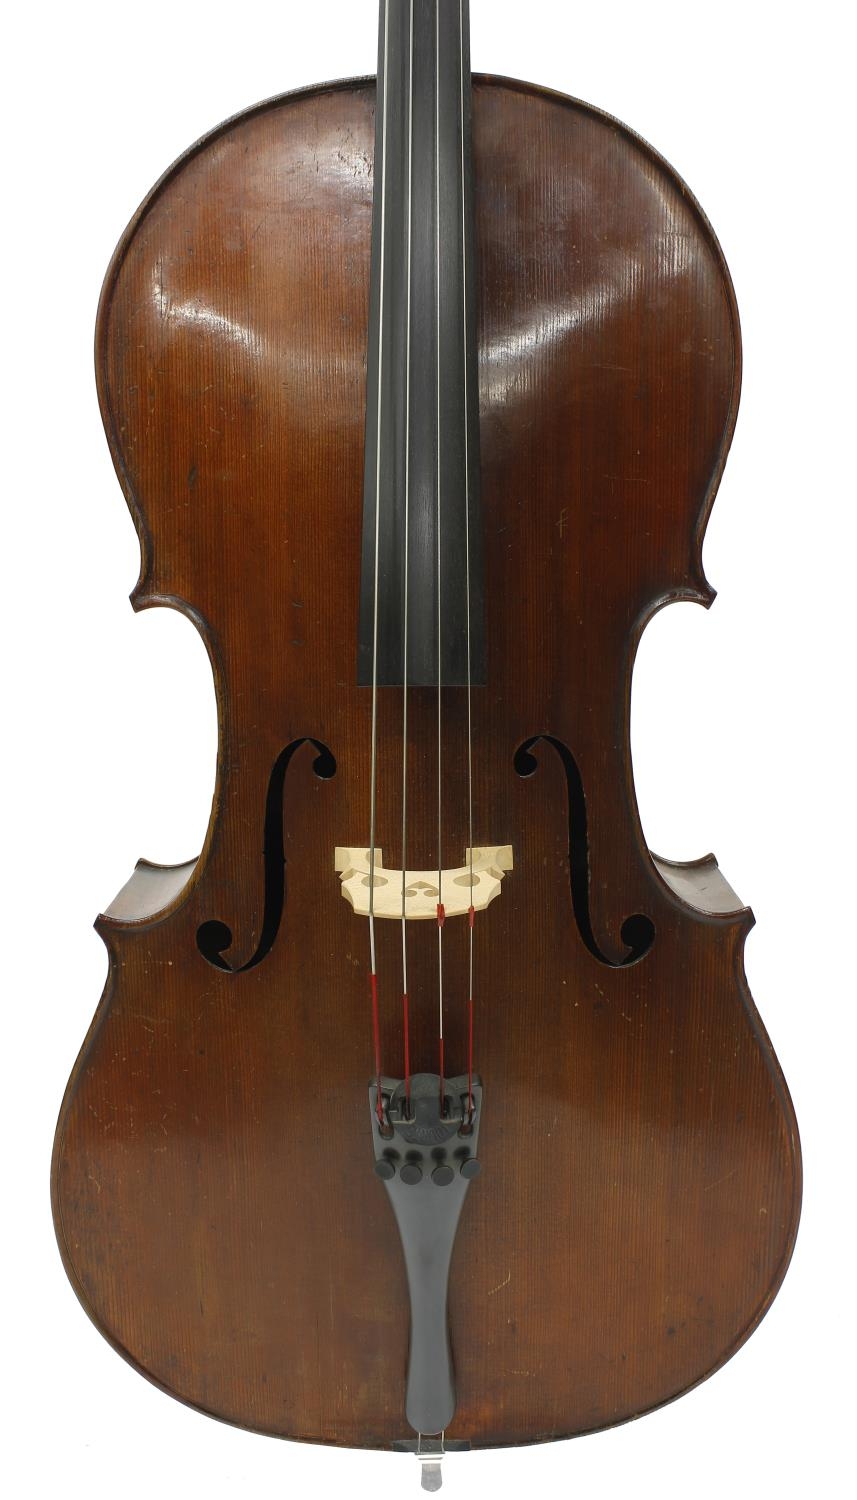 Fine French violoncello by and labelled Paul Bailly, Violin Maker, Pupil of Jean Baptiste